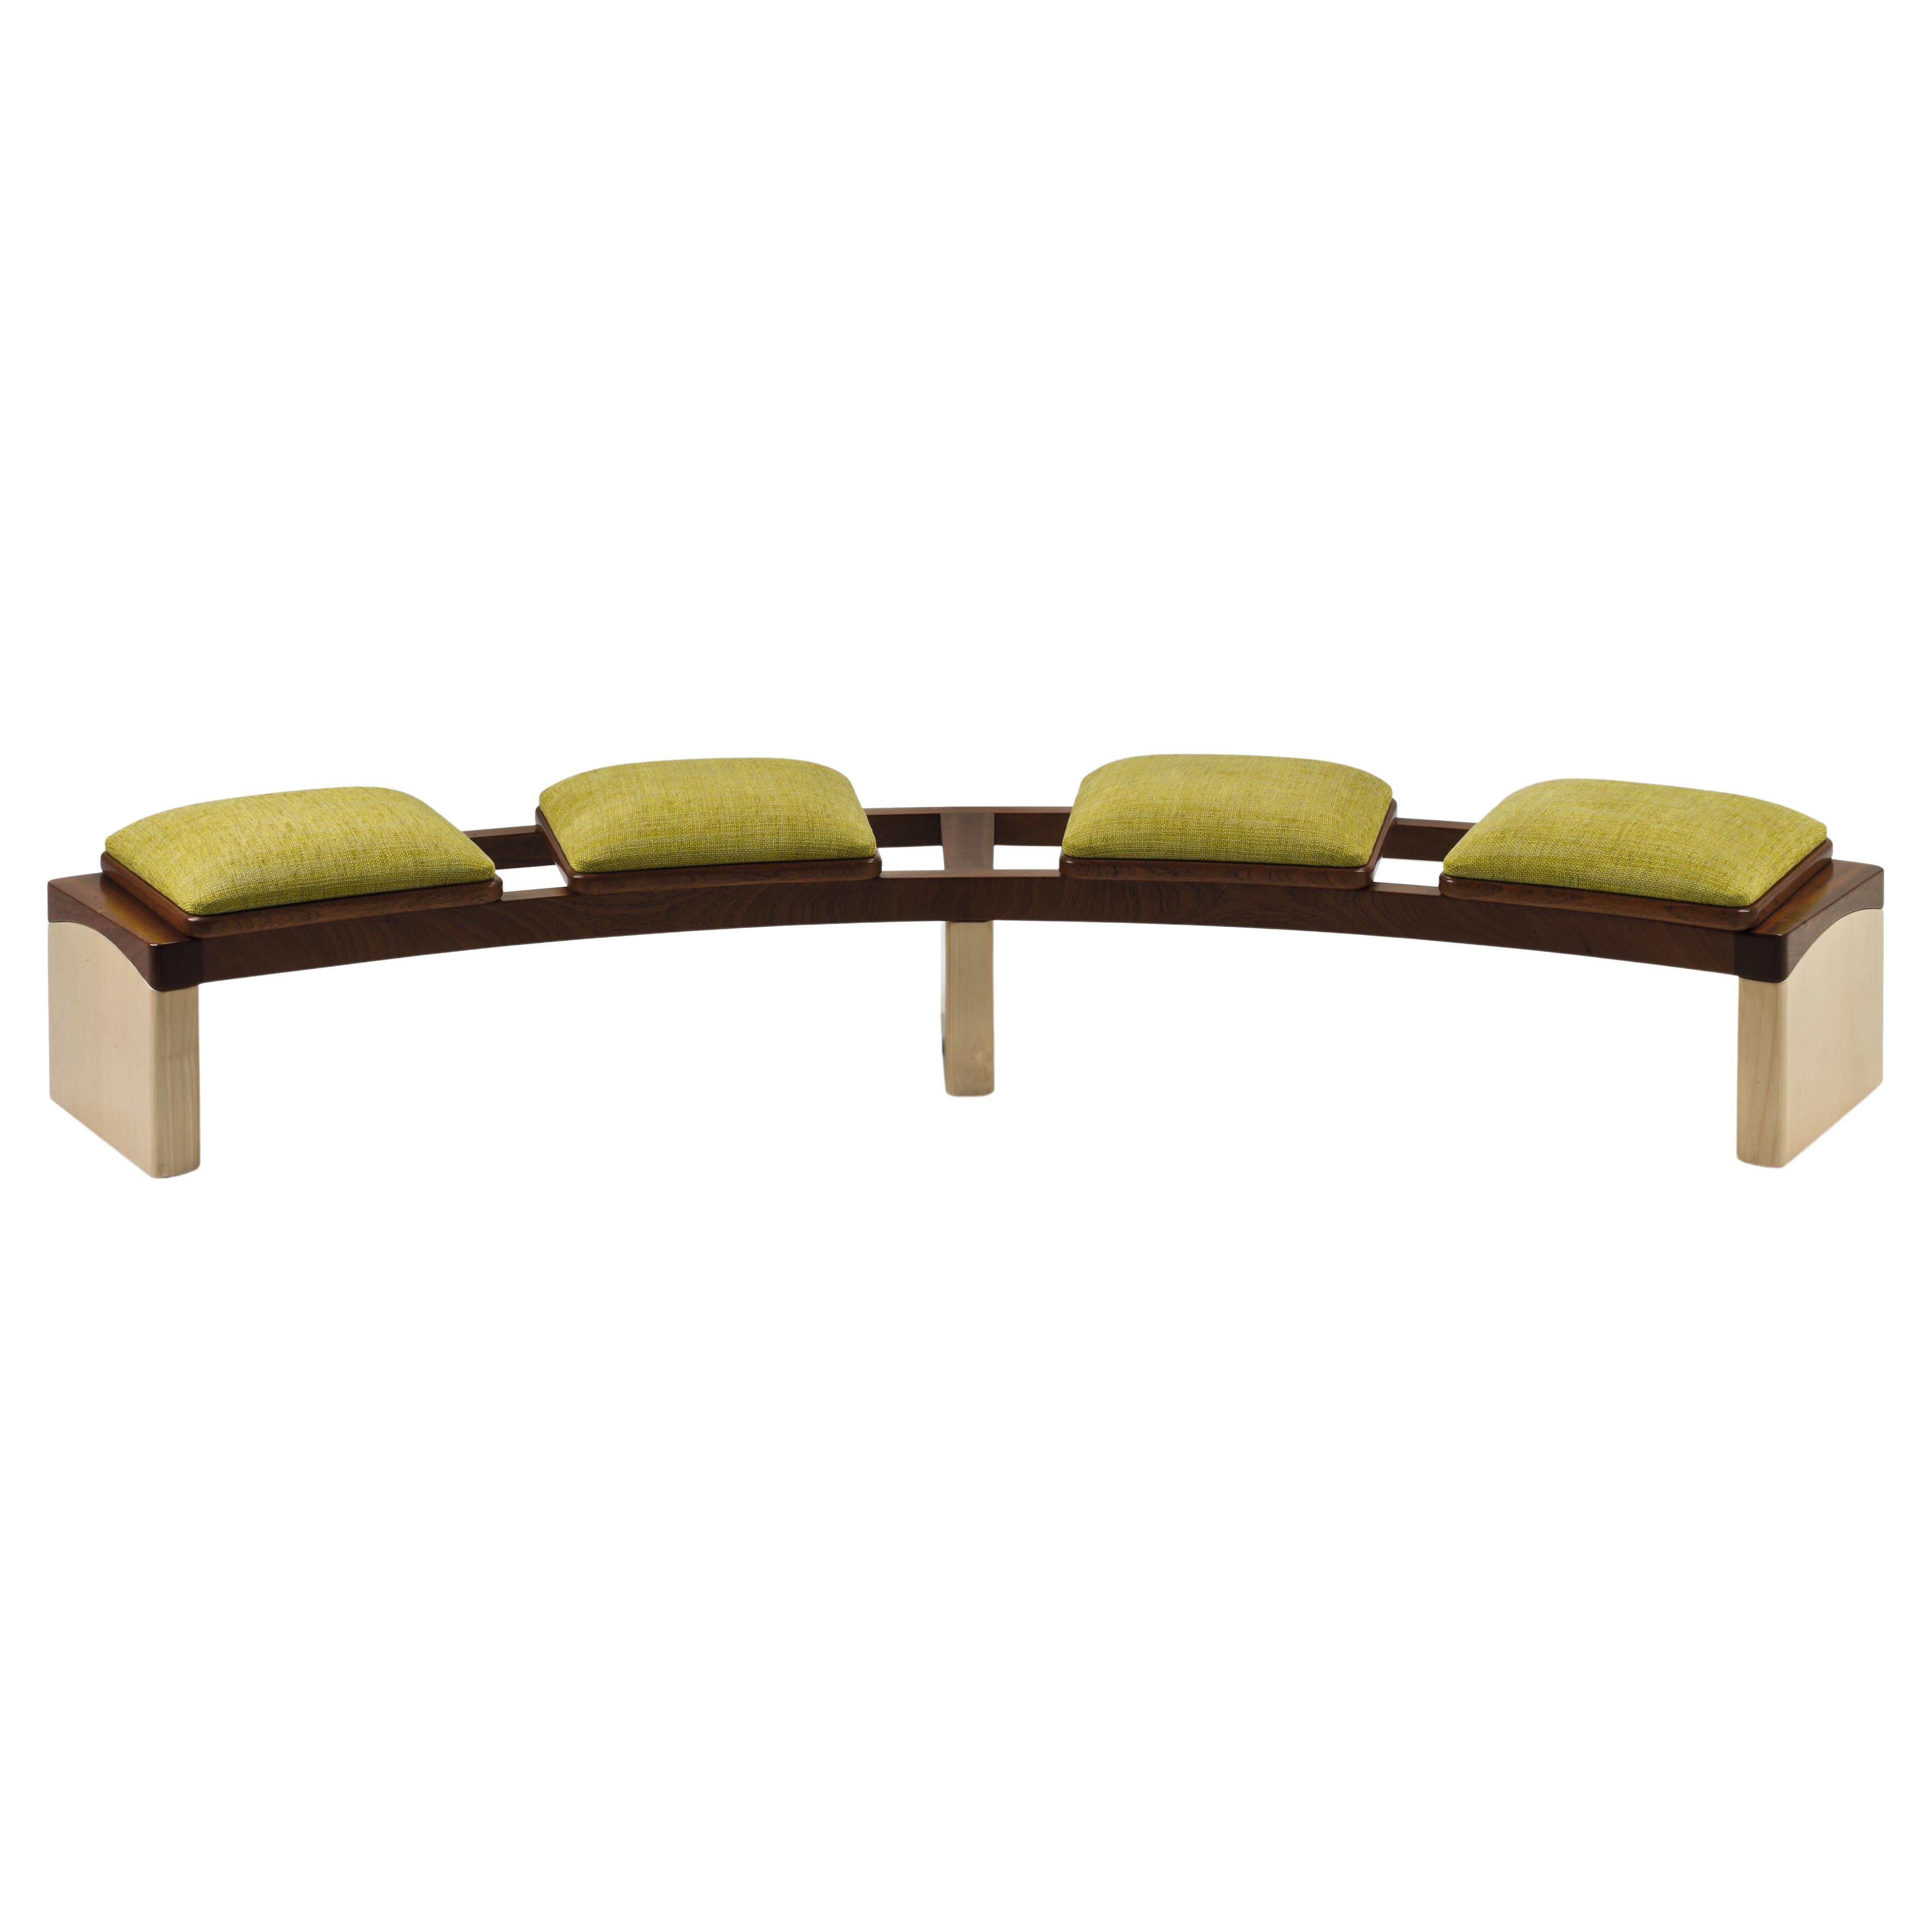 Rail Semi-circular Bench in Mahogany and Maple Wood with Padded Seat